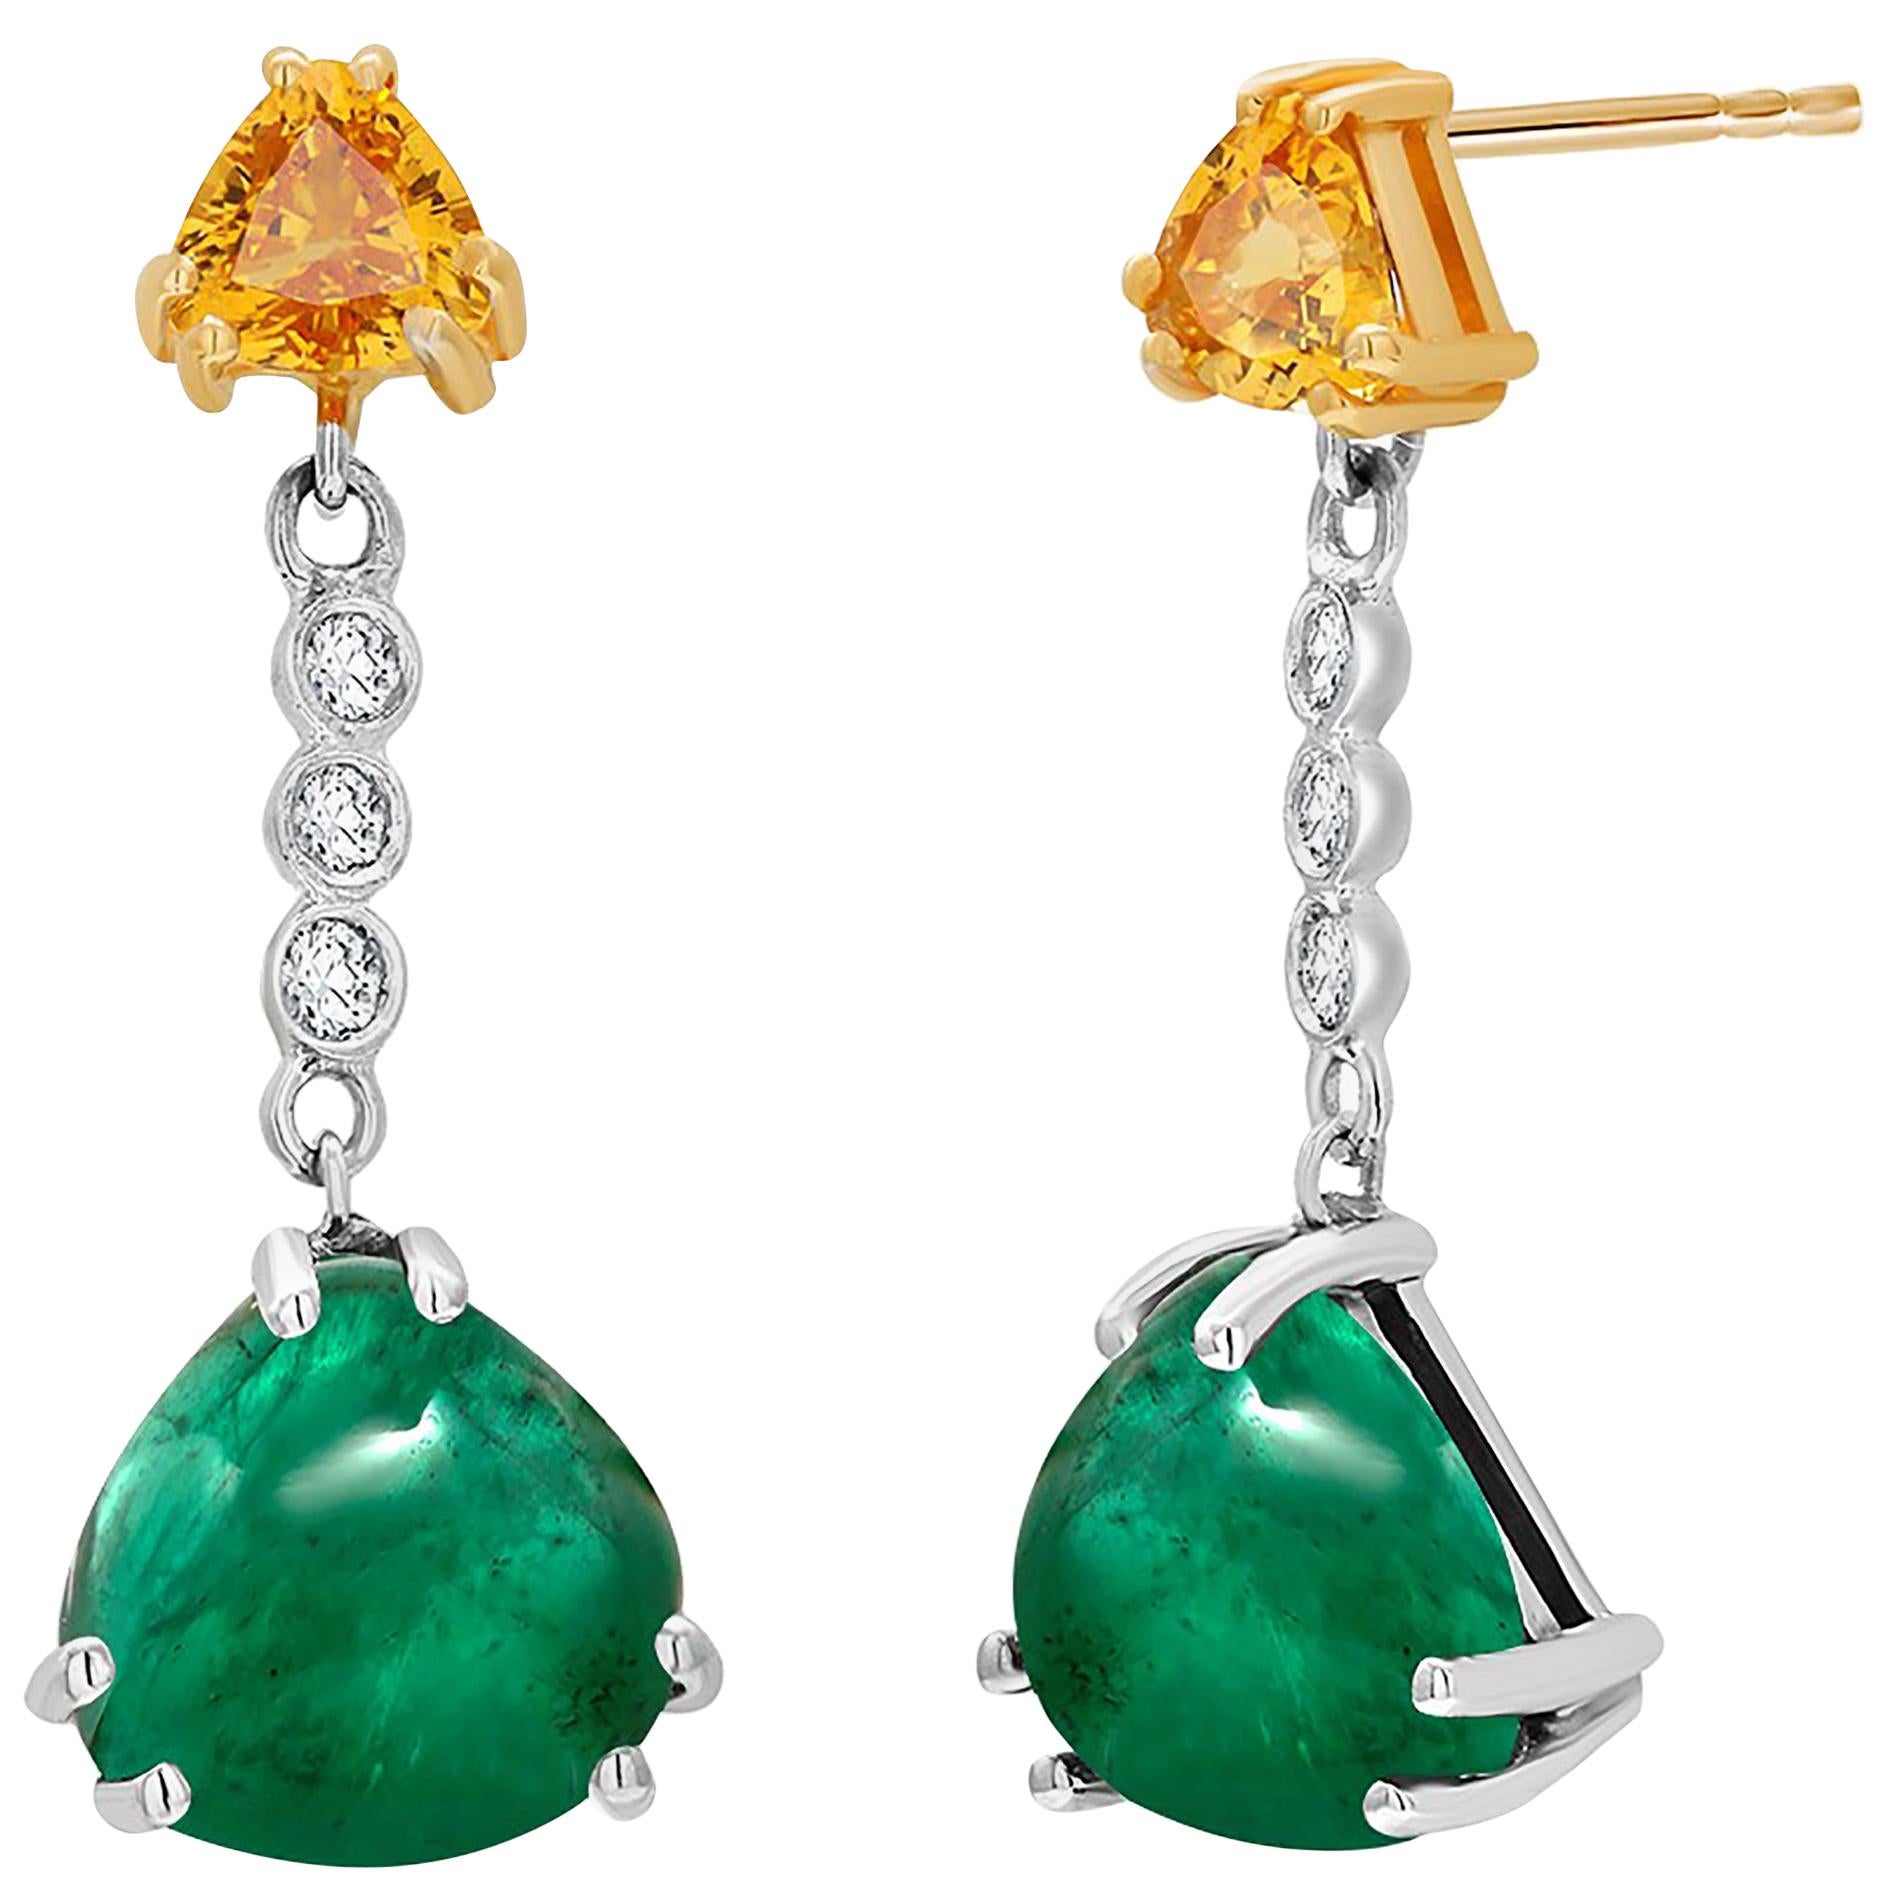 Contemporary Cabochon Emerald Yellow Sapphire Diamond Gold Earrings Weighing 5.81 Carat